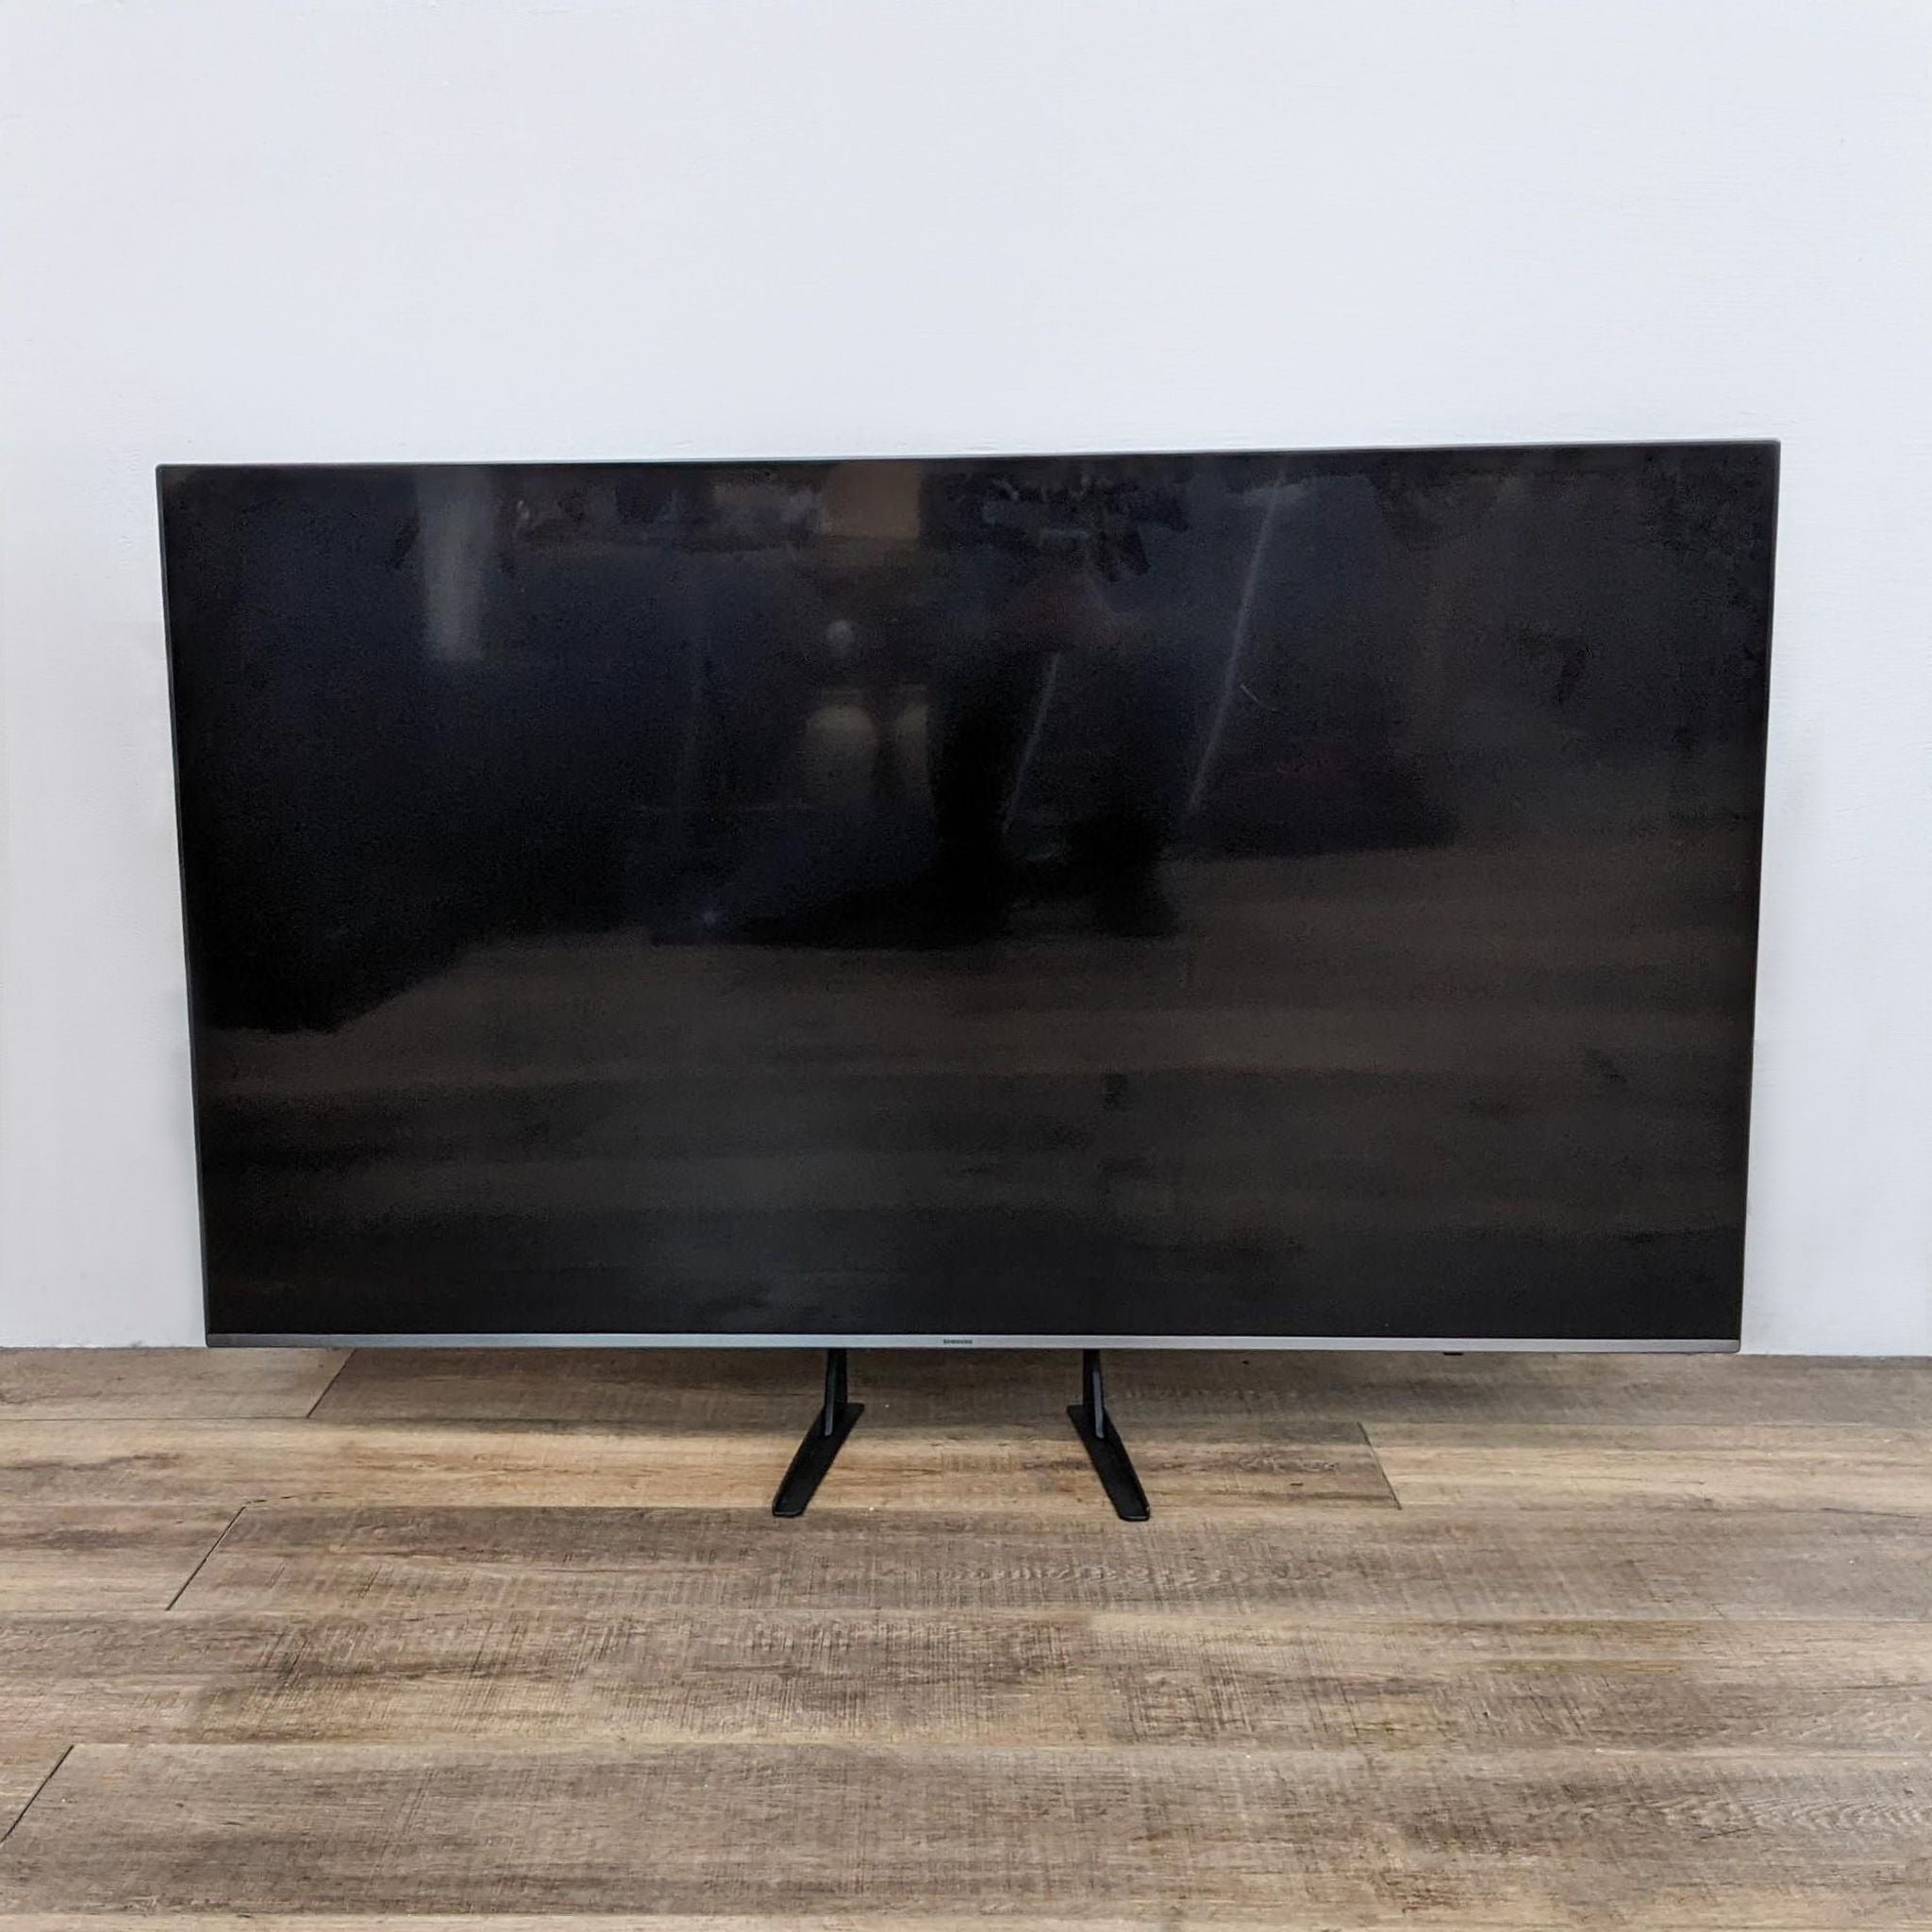 1. Samsung TV displayed on a wooden floor with a black screen reflecting the surrounding room.